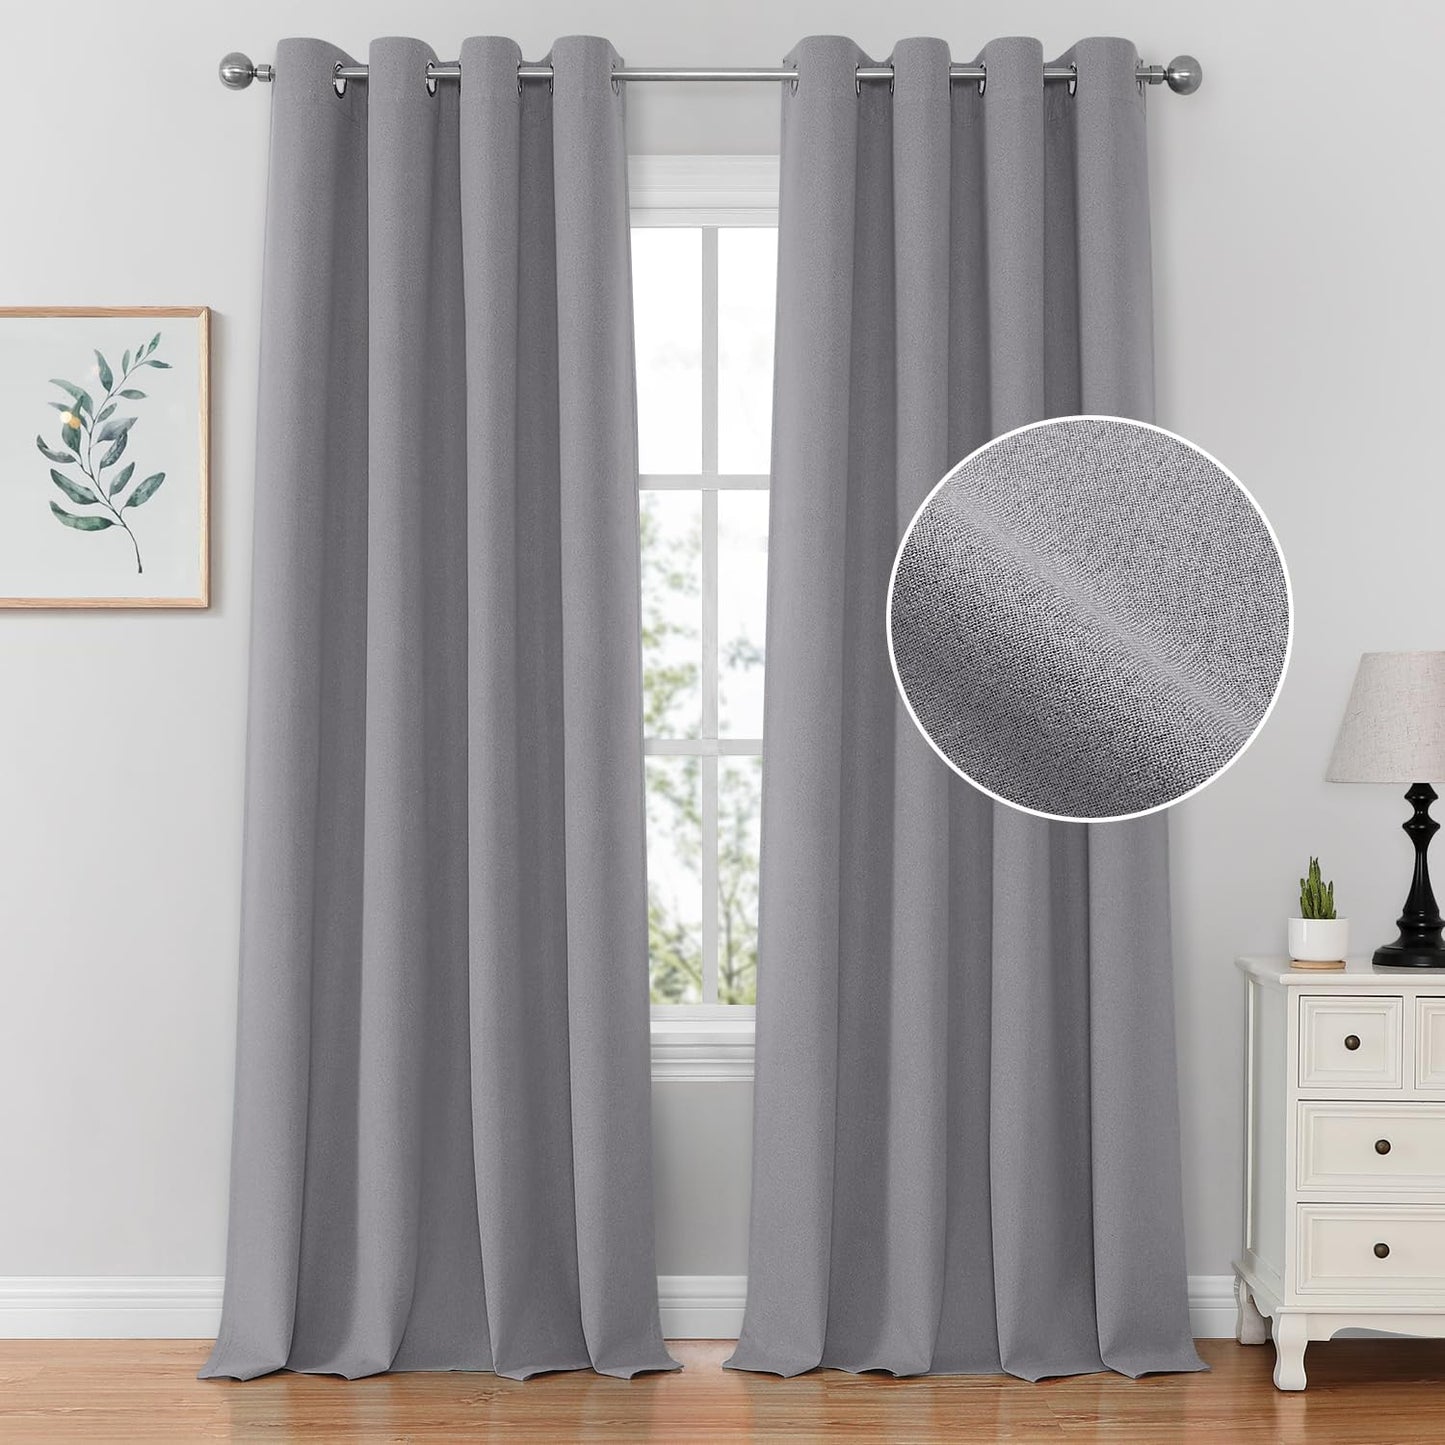 HOMEIDEAS 100% Blush Pink Linen Blackout Curtains for Bedroom, 52 X 84 Inch Room Darkening Curtains for Living, Faux Linen Thermal Insulated Full Black Out Grommet Window Curtains/Drapes  HOMEIDEAS Light Grey W52" X L84" 